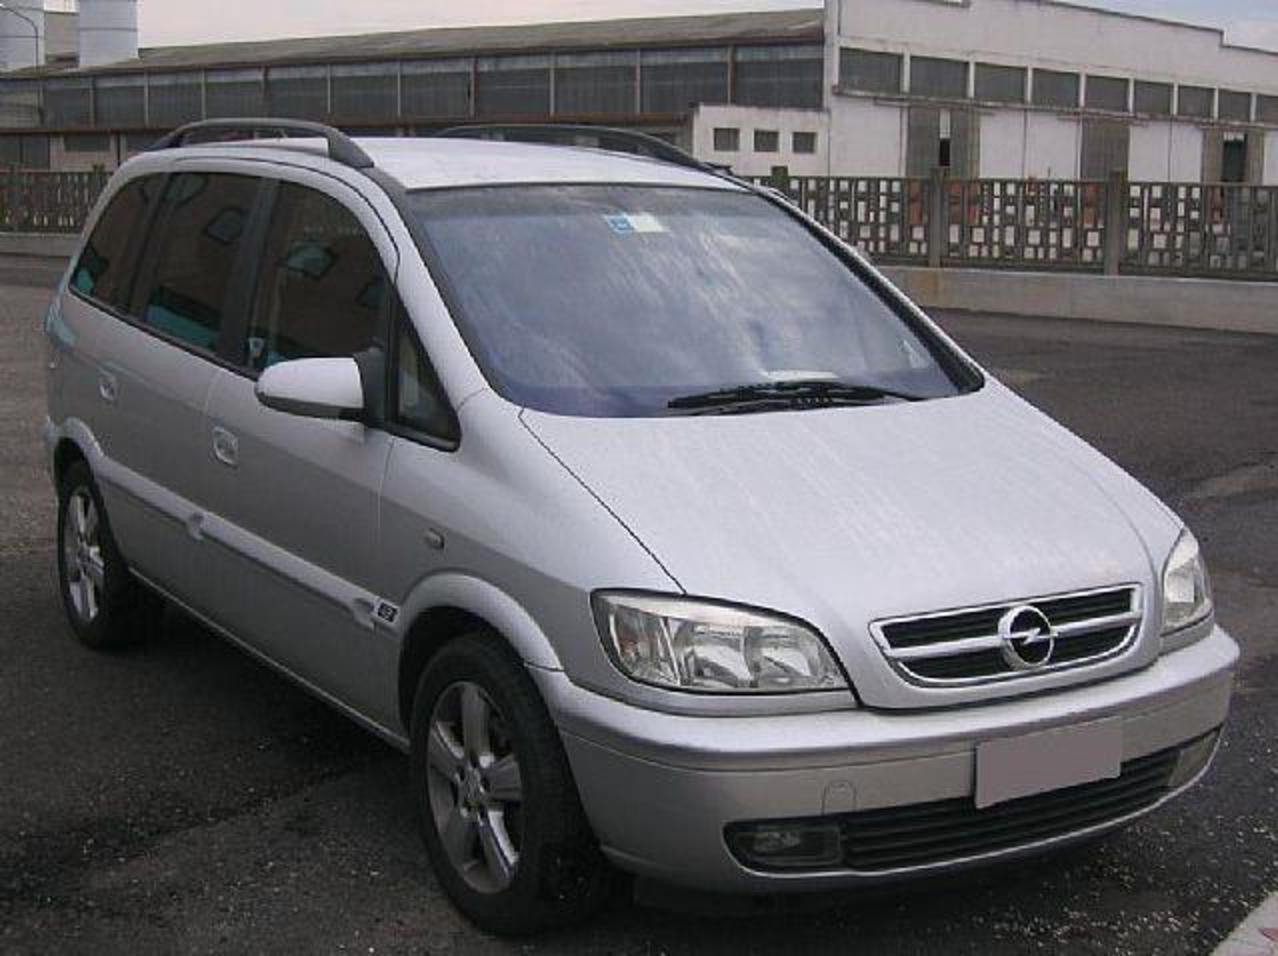 File:Opel zafira a.JPG. No higher resolution available.